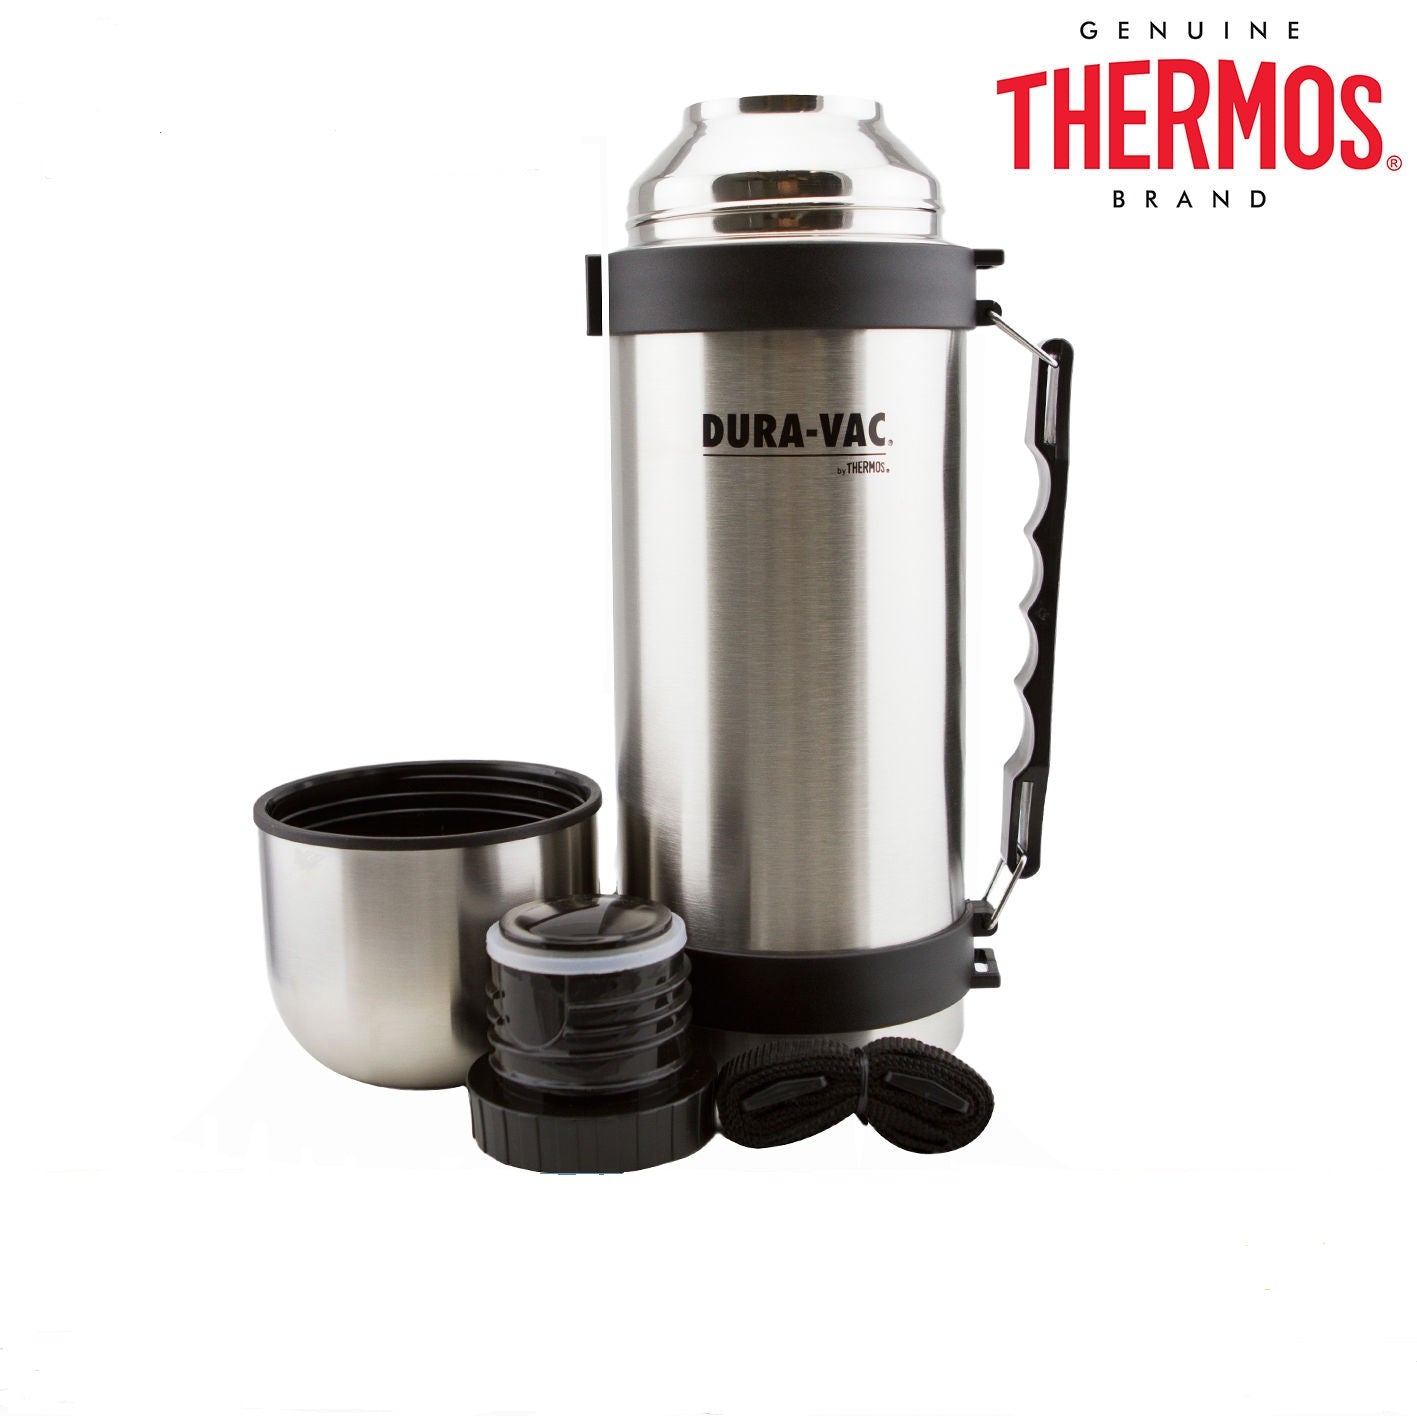 New THERMOS ThermoCafe Stainless Steel Vacuum Insulated Flask 1.0 Litre  Black